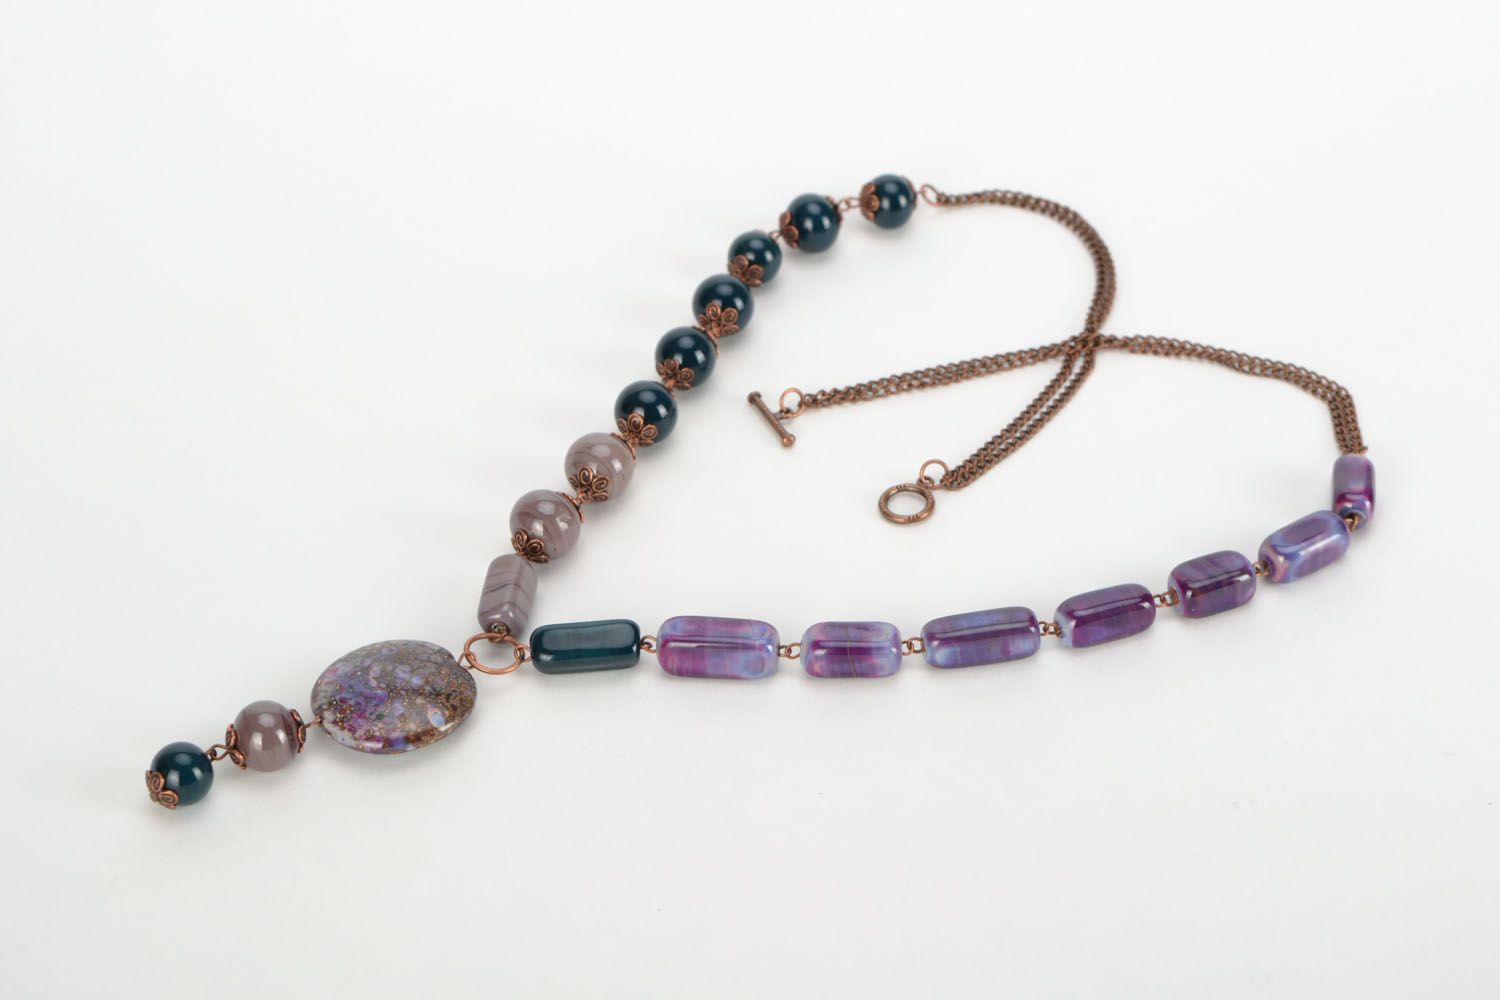 Bead necklace with adjustable length photo 3